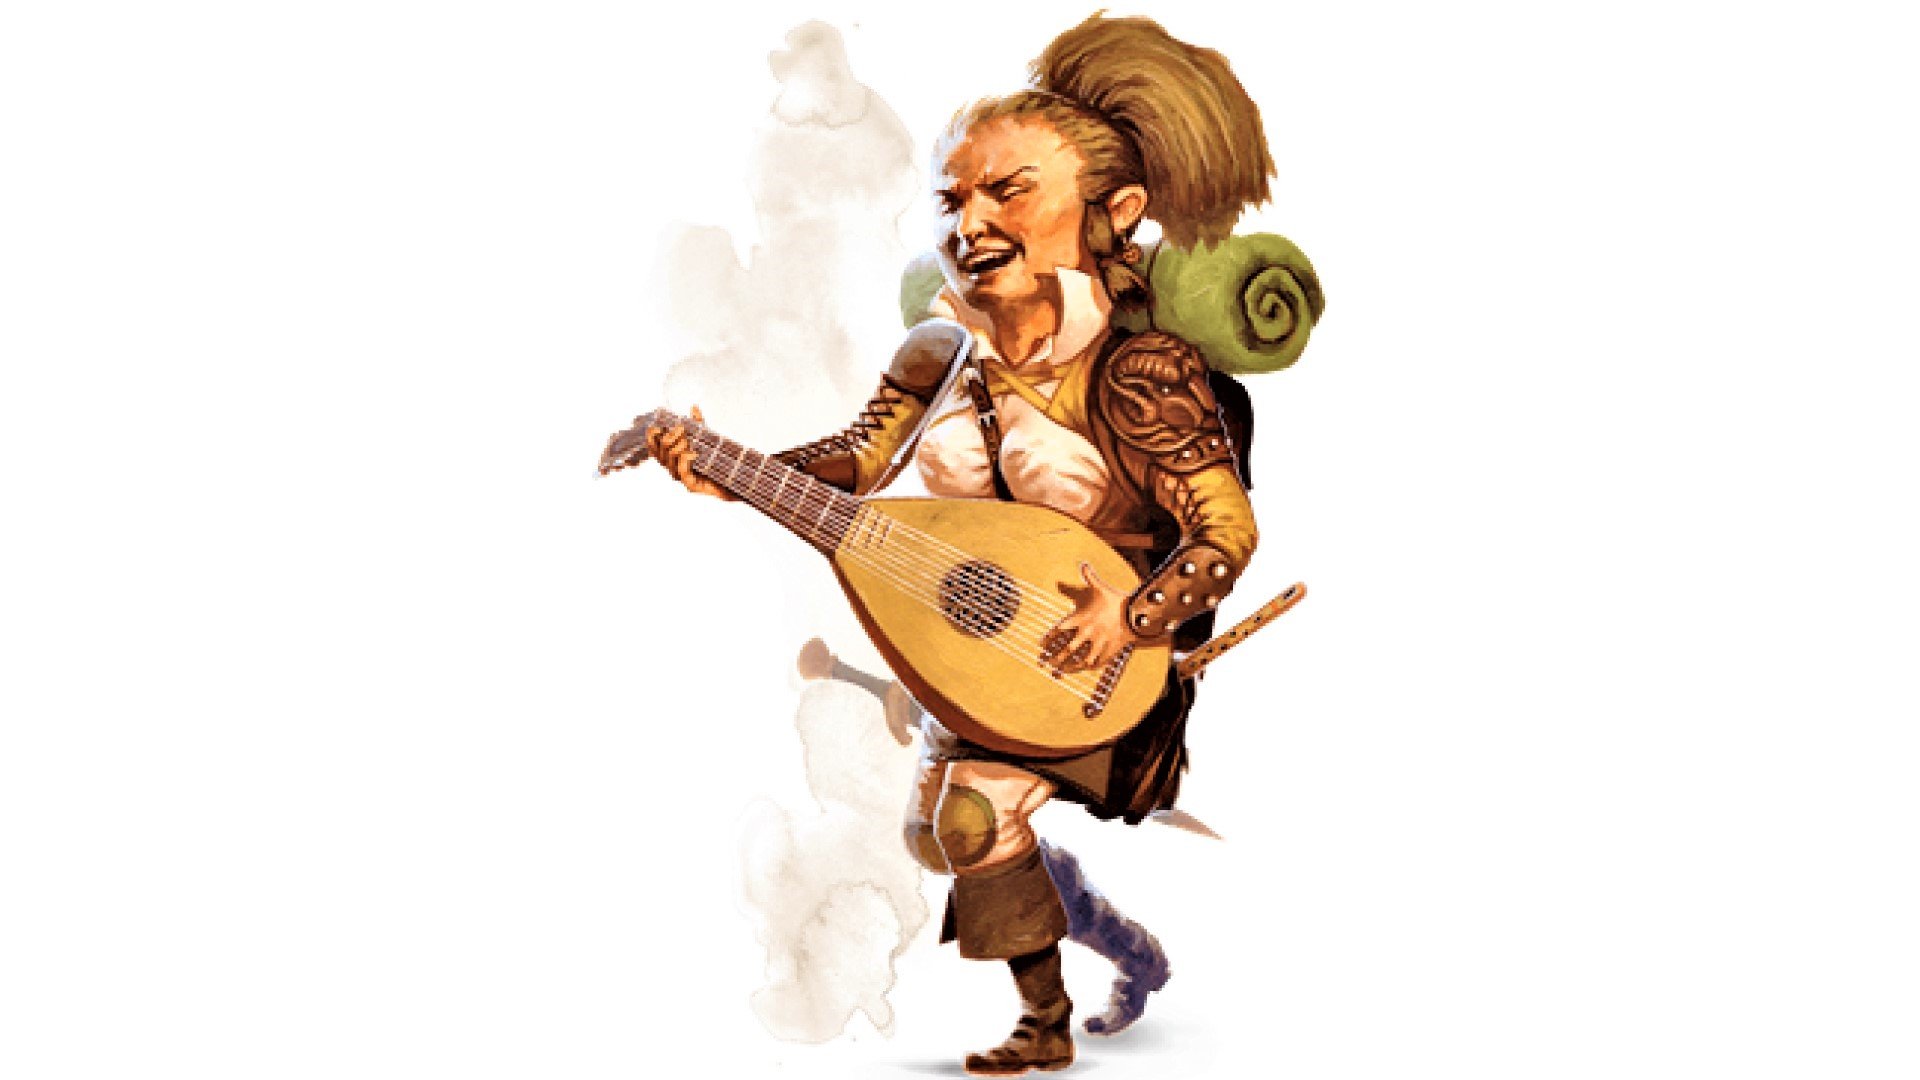 DnD Bard 5e - D&D artwork showing a halfling character playing a lute with a pack on their back